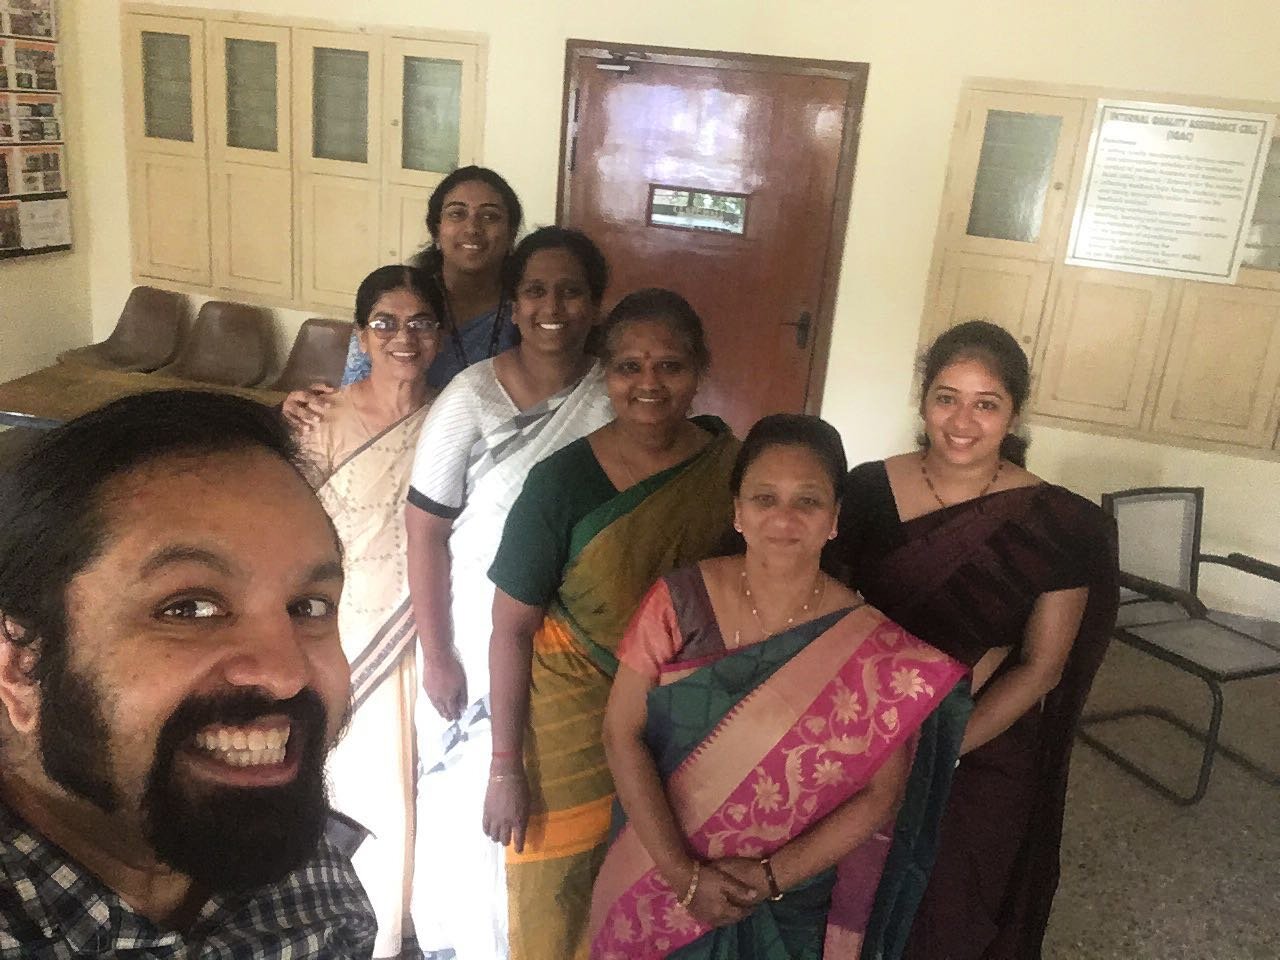 This is Ted Samuel , Shansi&rsquo;s Deputy Director, reporting from Madurai! It&rsquo;s been three years since I&rsquo;ve traveled to India. While global circumstances have changed immeasurably since my last visit, I was honored to receive a warm wel